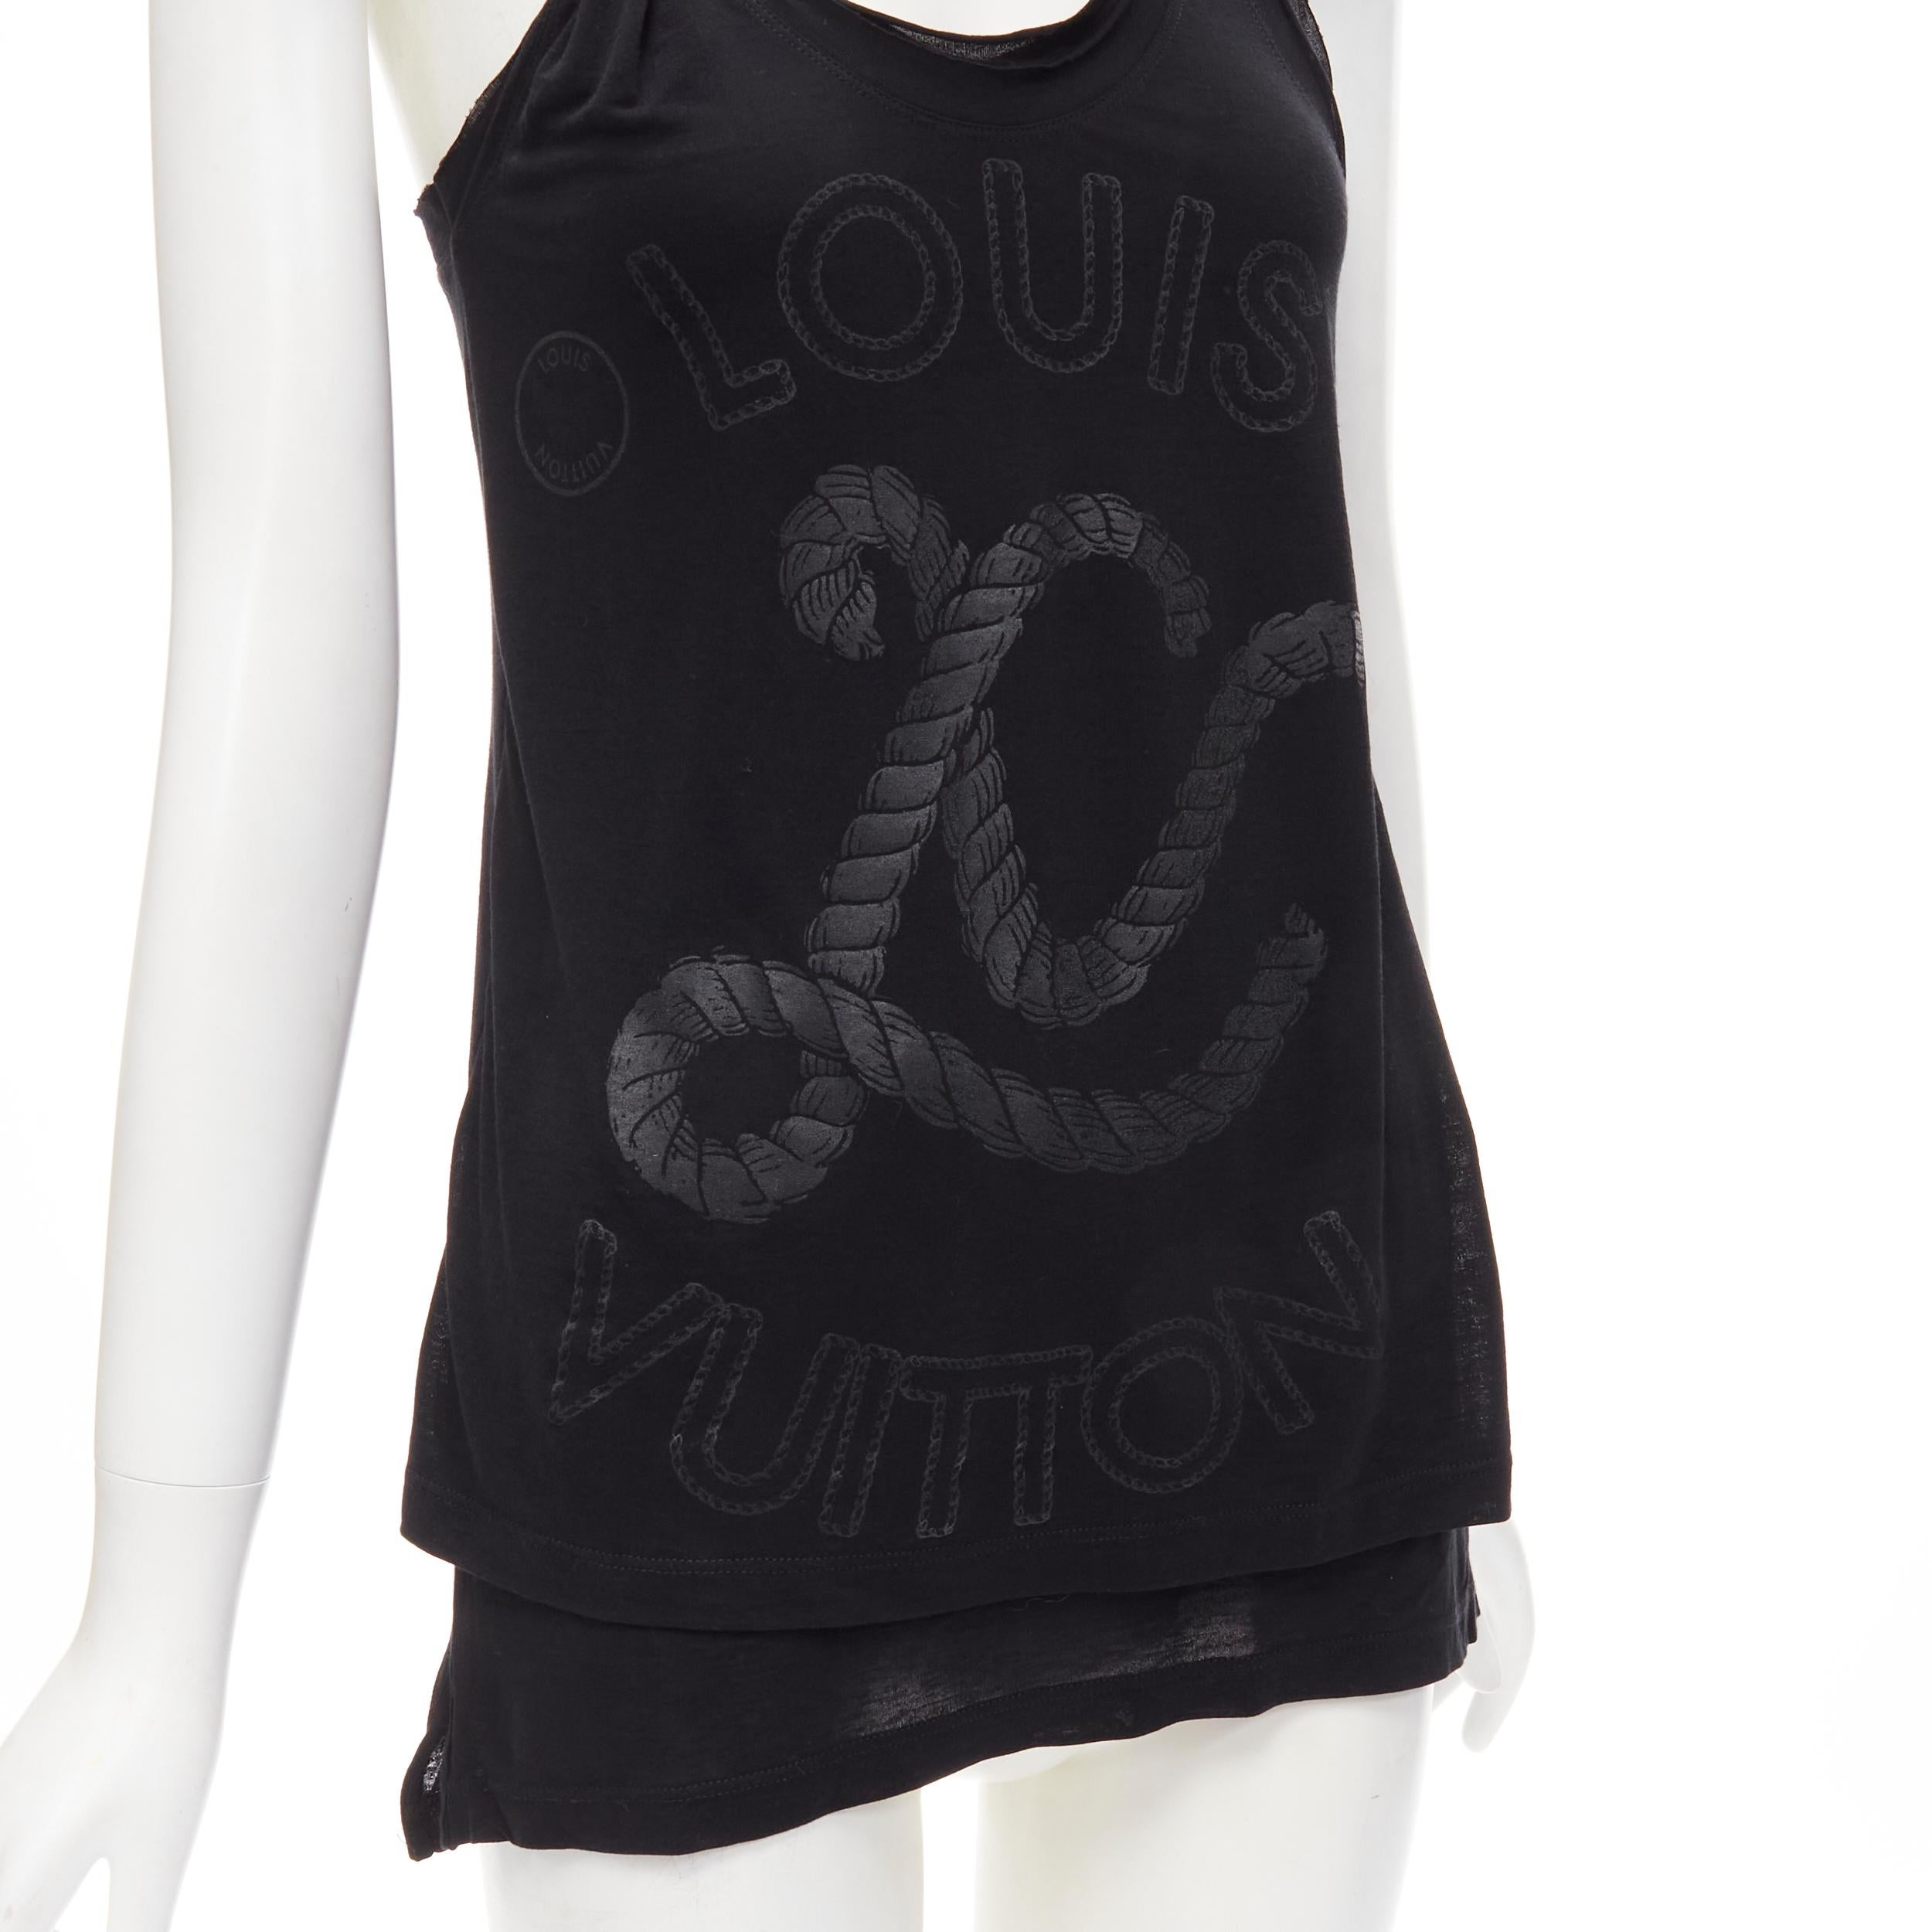 LOUIS VUITTON black LV logo print twist shoulder layered hem tank top S 
Reference: ANWU/A00617 
Brand: Louis Vuitton 
Material: Feels like cotton 
Color: Black 
Pattern: Solid 
Extra Detail: Wrap twist detailing on shoulder strap. Scooped neckline.